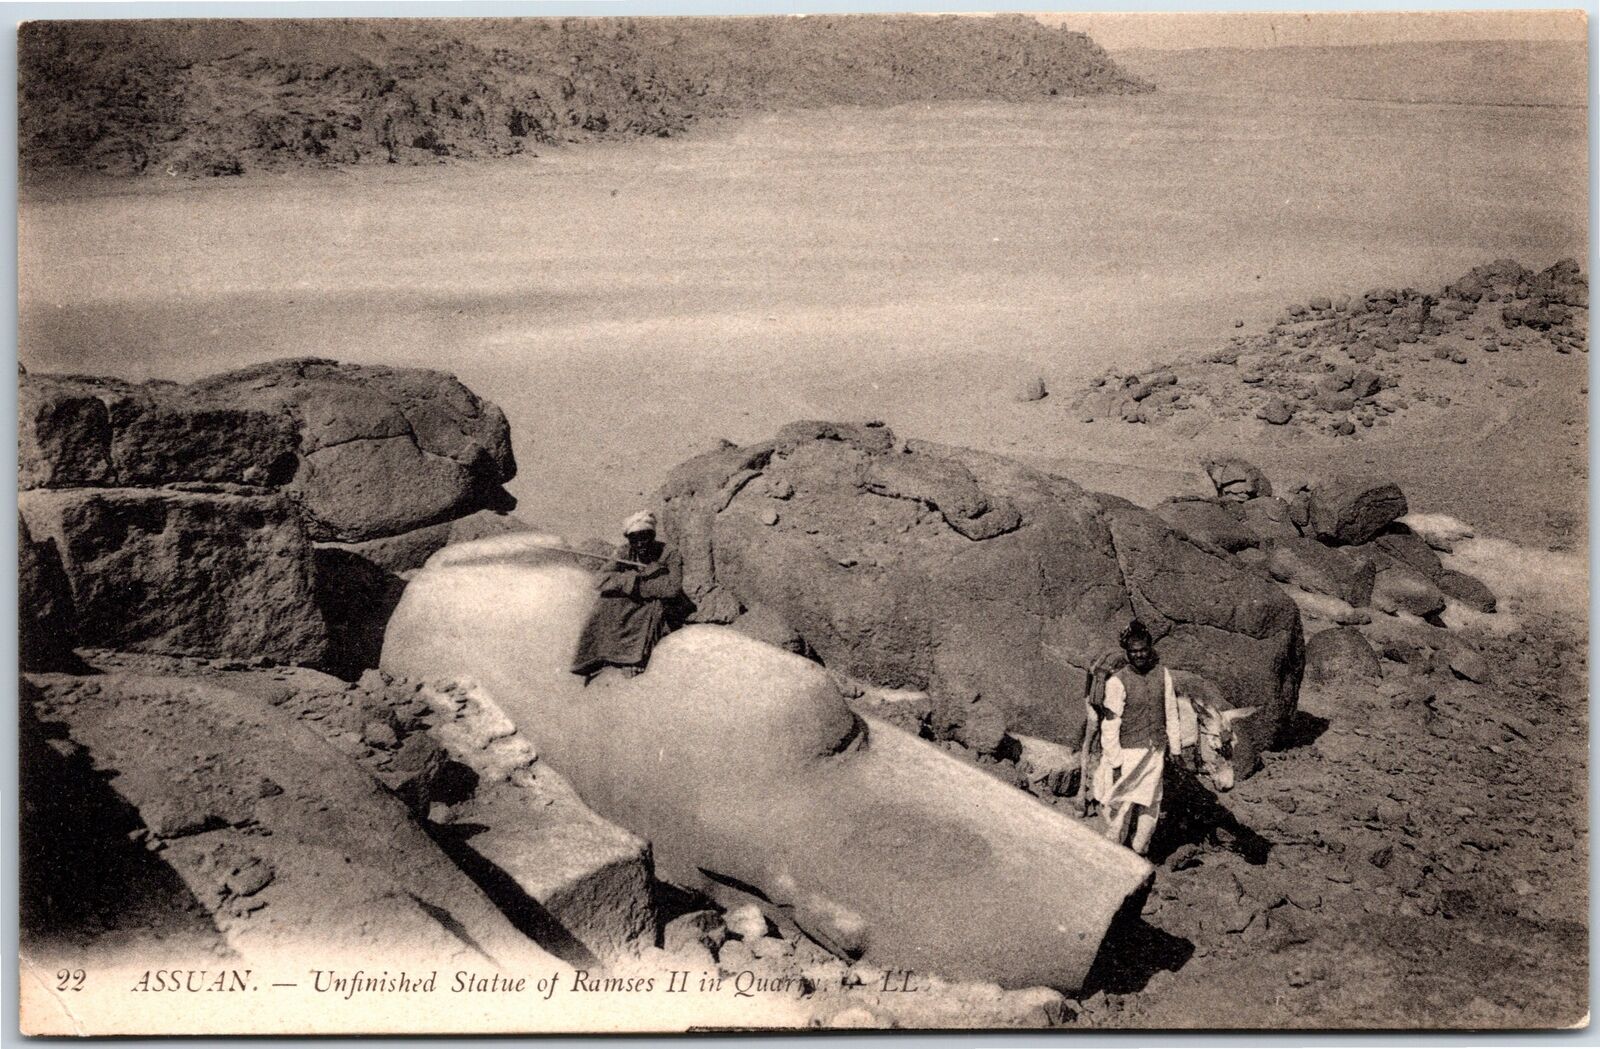 VINTAGE POSTCARD UNFINISHED RAMSES II STATUE ON THE BANKS OF THE ASWAN DAM EGYPT